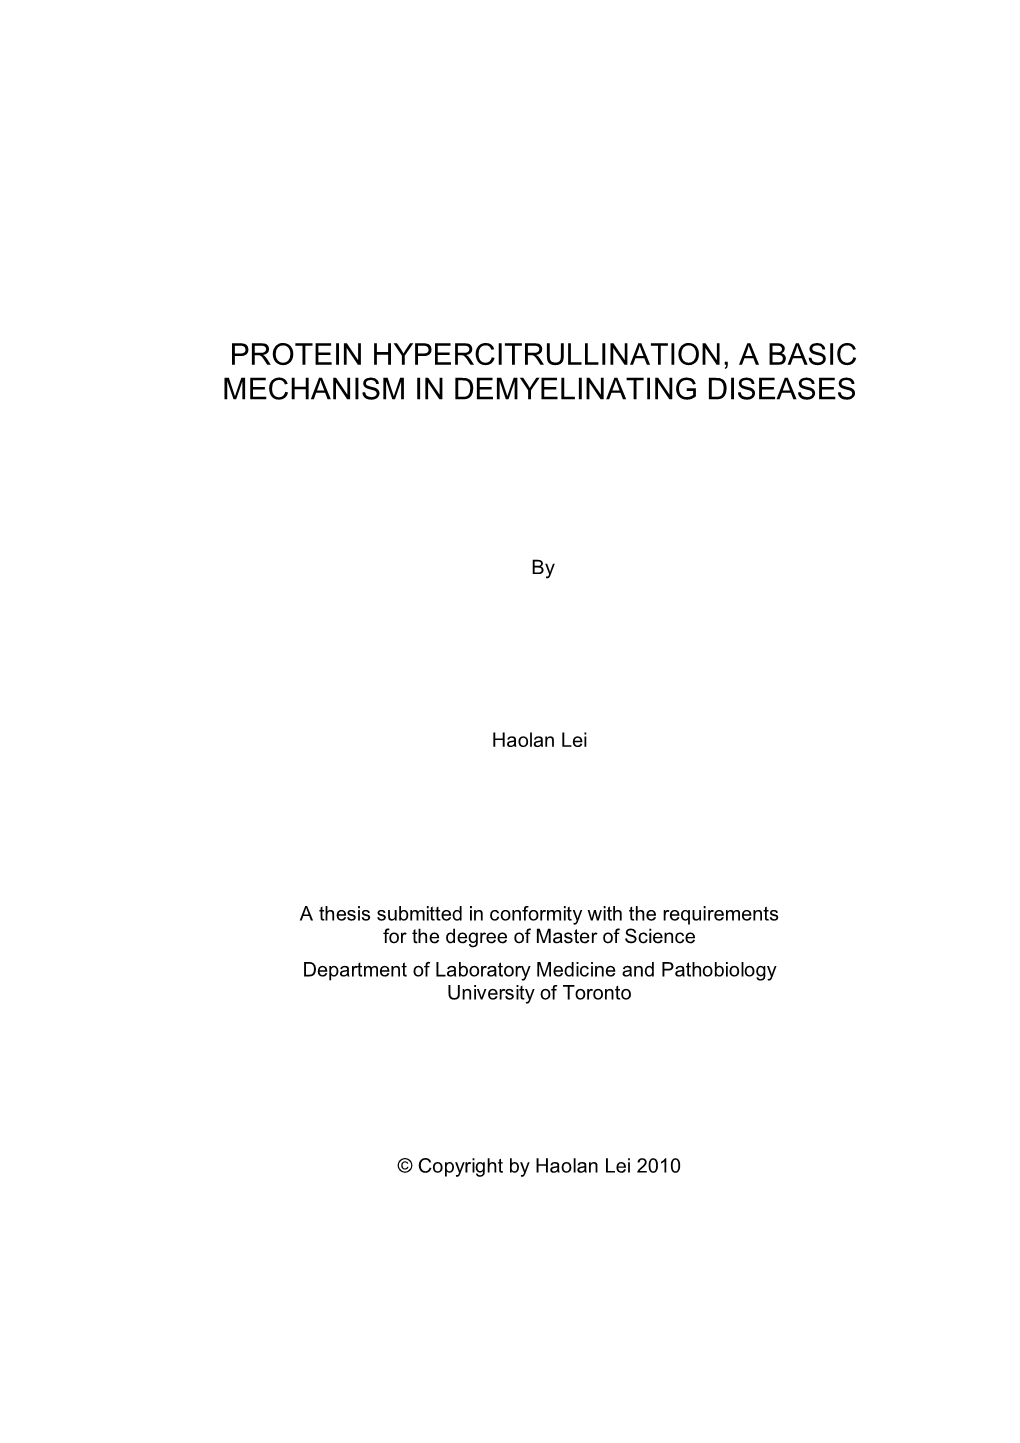 Protein Hypercitrullination, a Basic Mechanism in Demyelinating Diseases